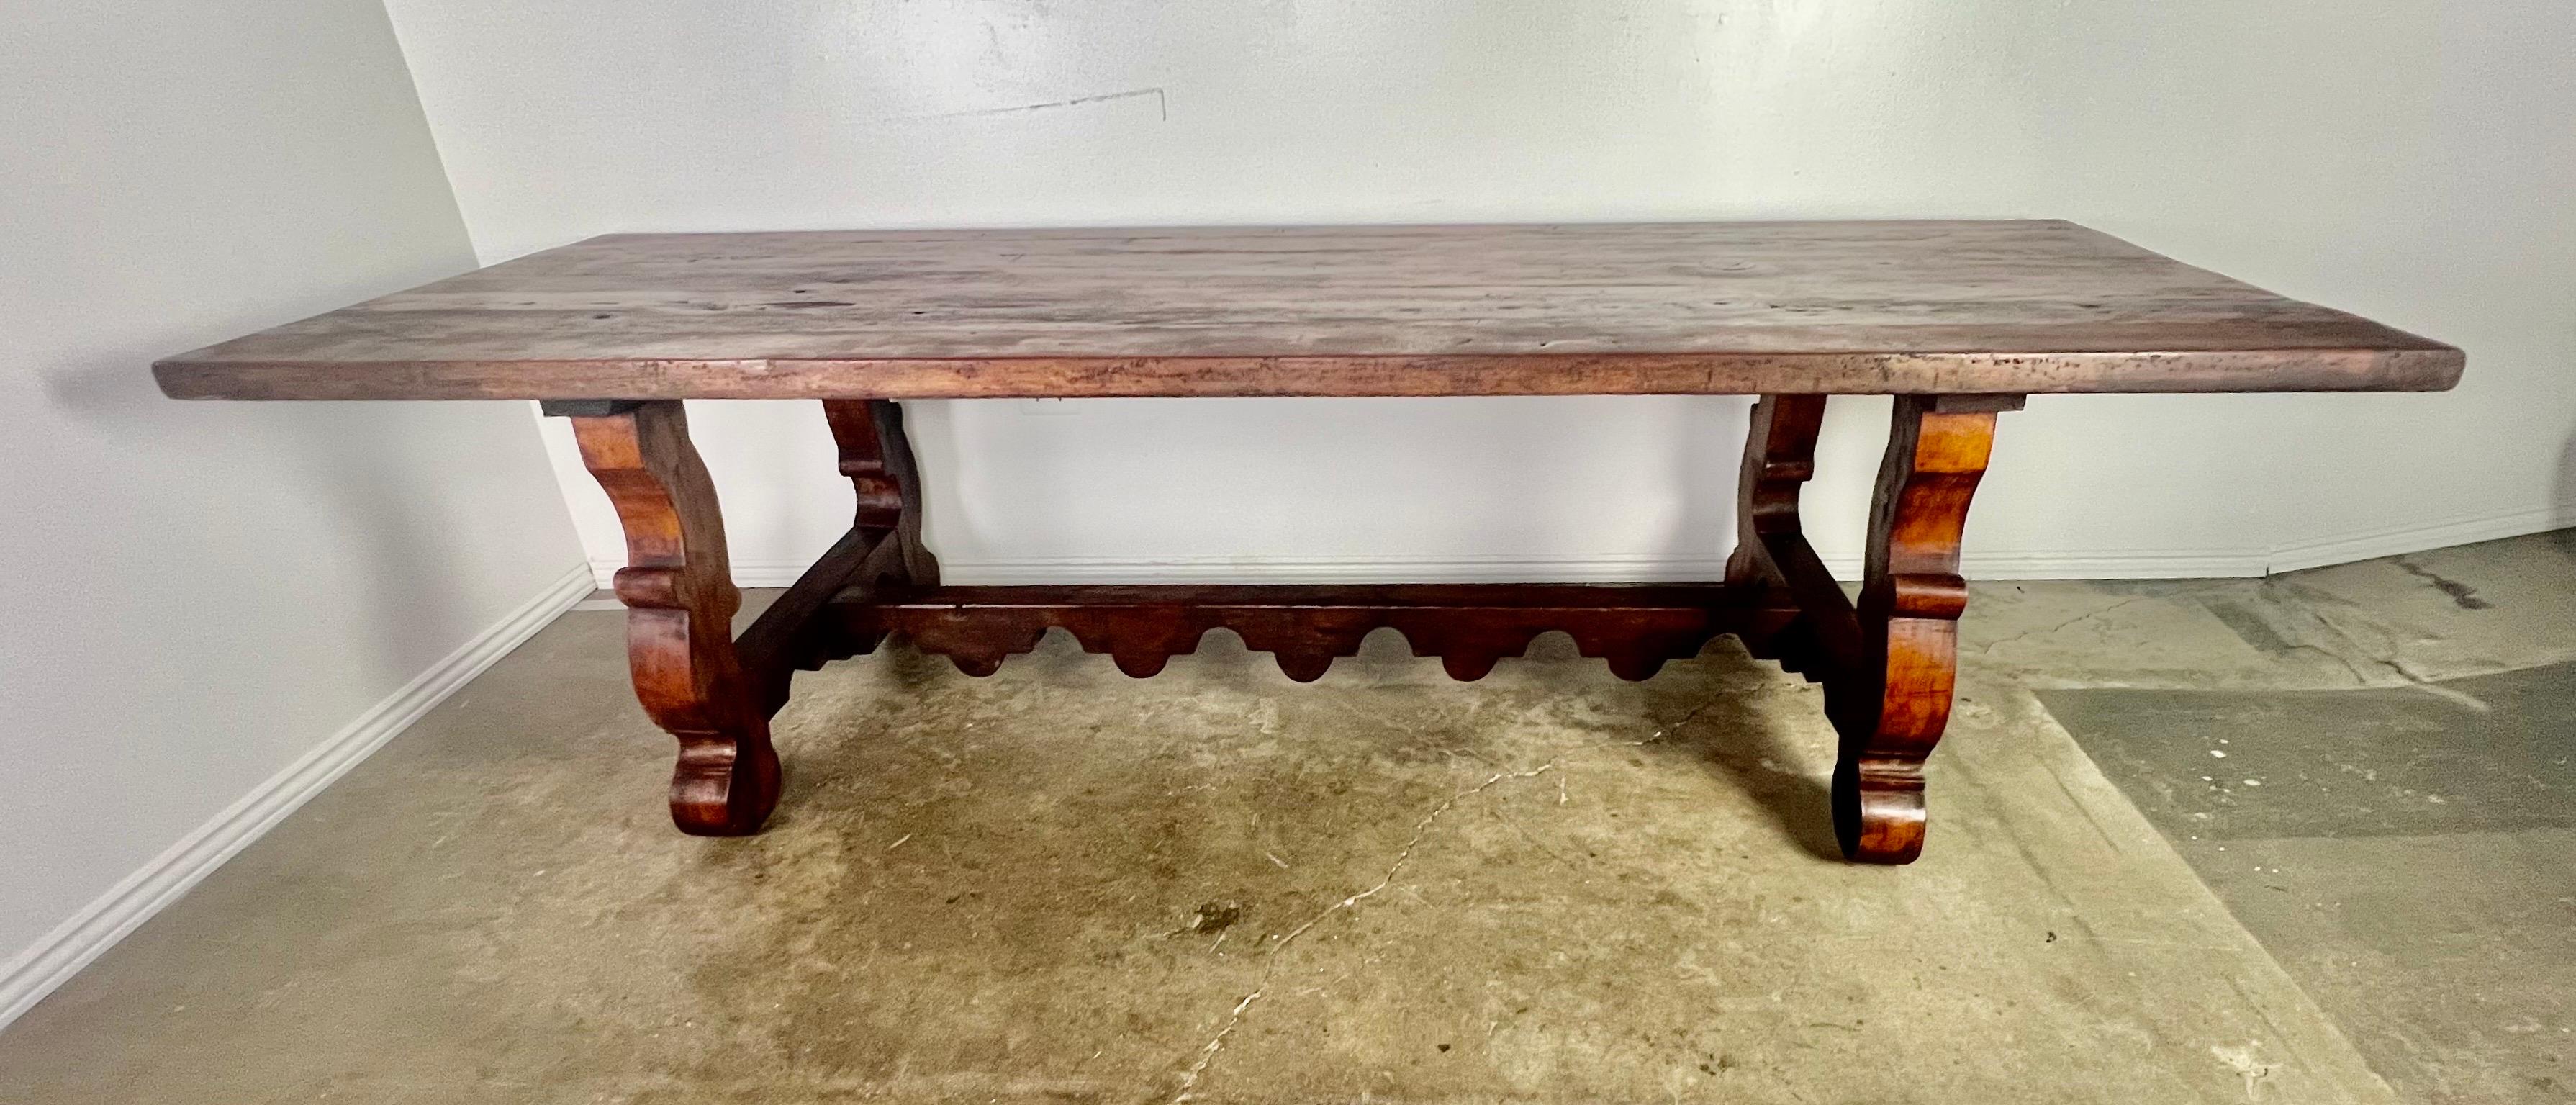 19th century Spanish pine refractory table. The table stands on two pedestal bases connected by a scalloped stretcher. Wear is consistent with age and use of the table.